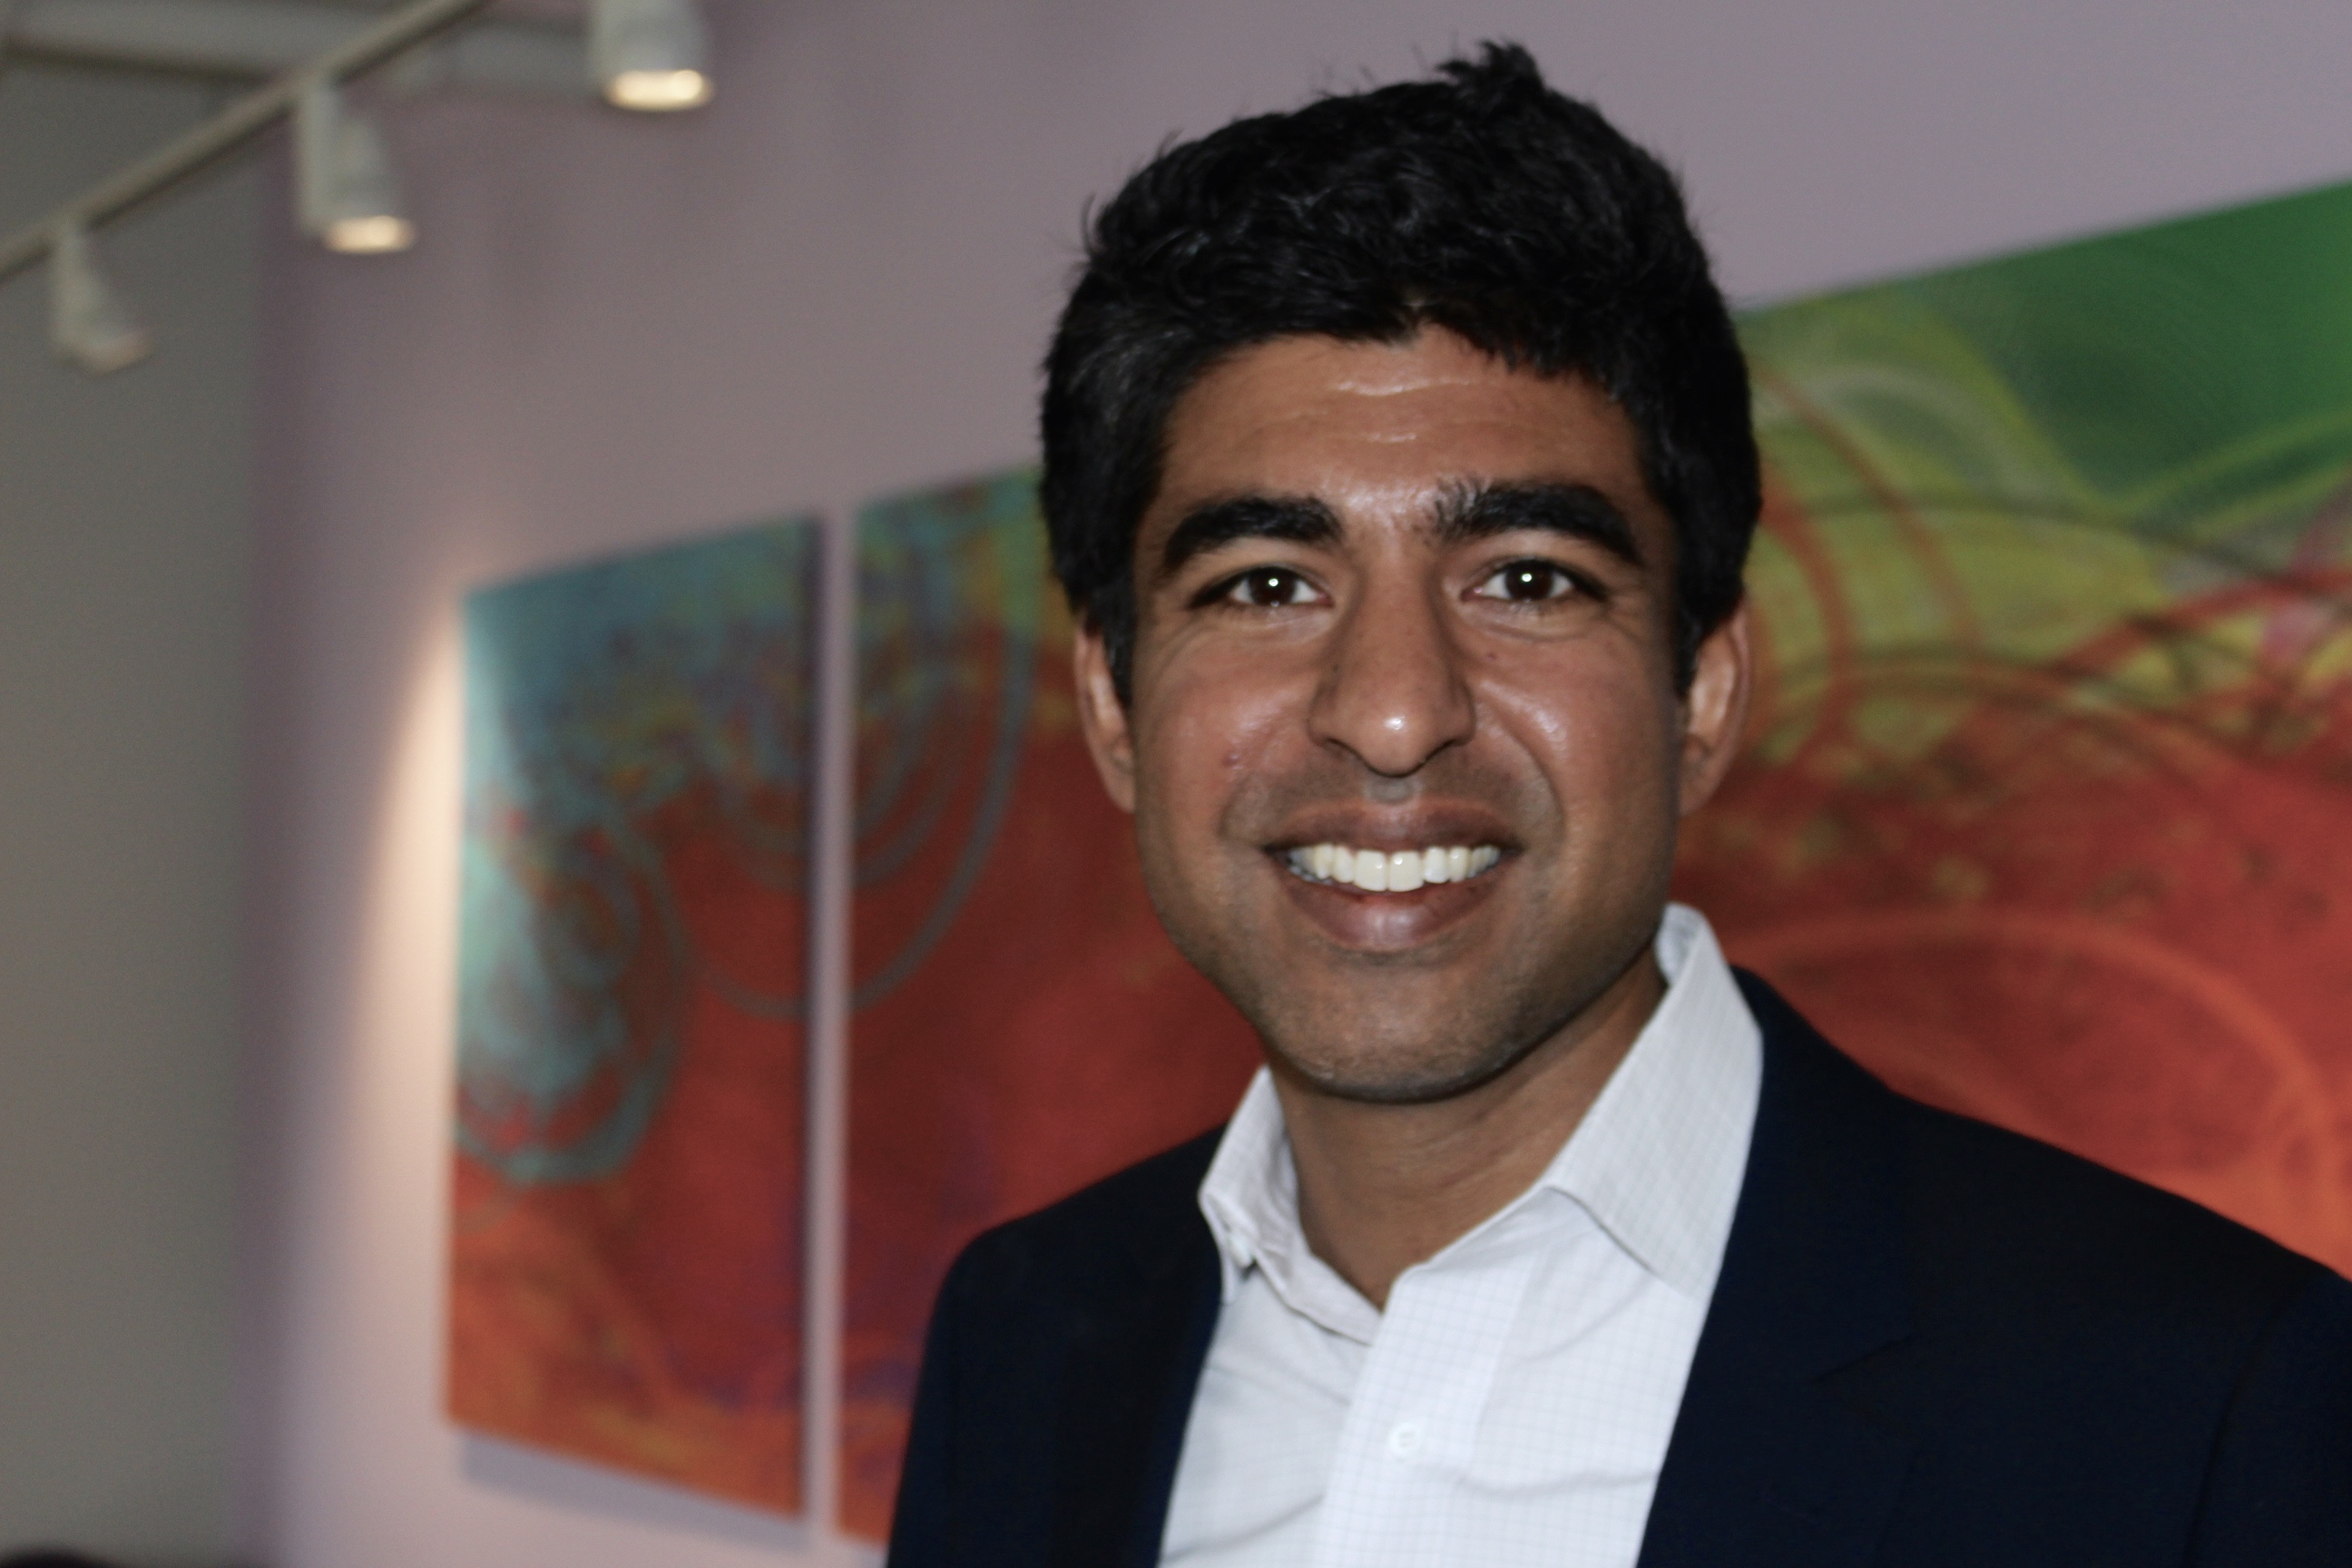 Dr. Neel Shah, obstetrician at Beth Israel Deaconess Medical Center and assistant professor of obstetrics at Harvard Medical School. Photo by Alexa Gagosz.